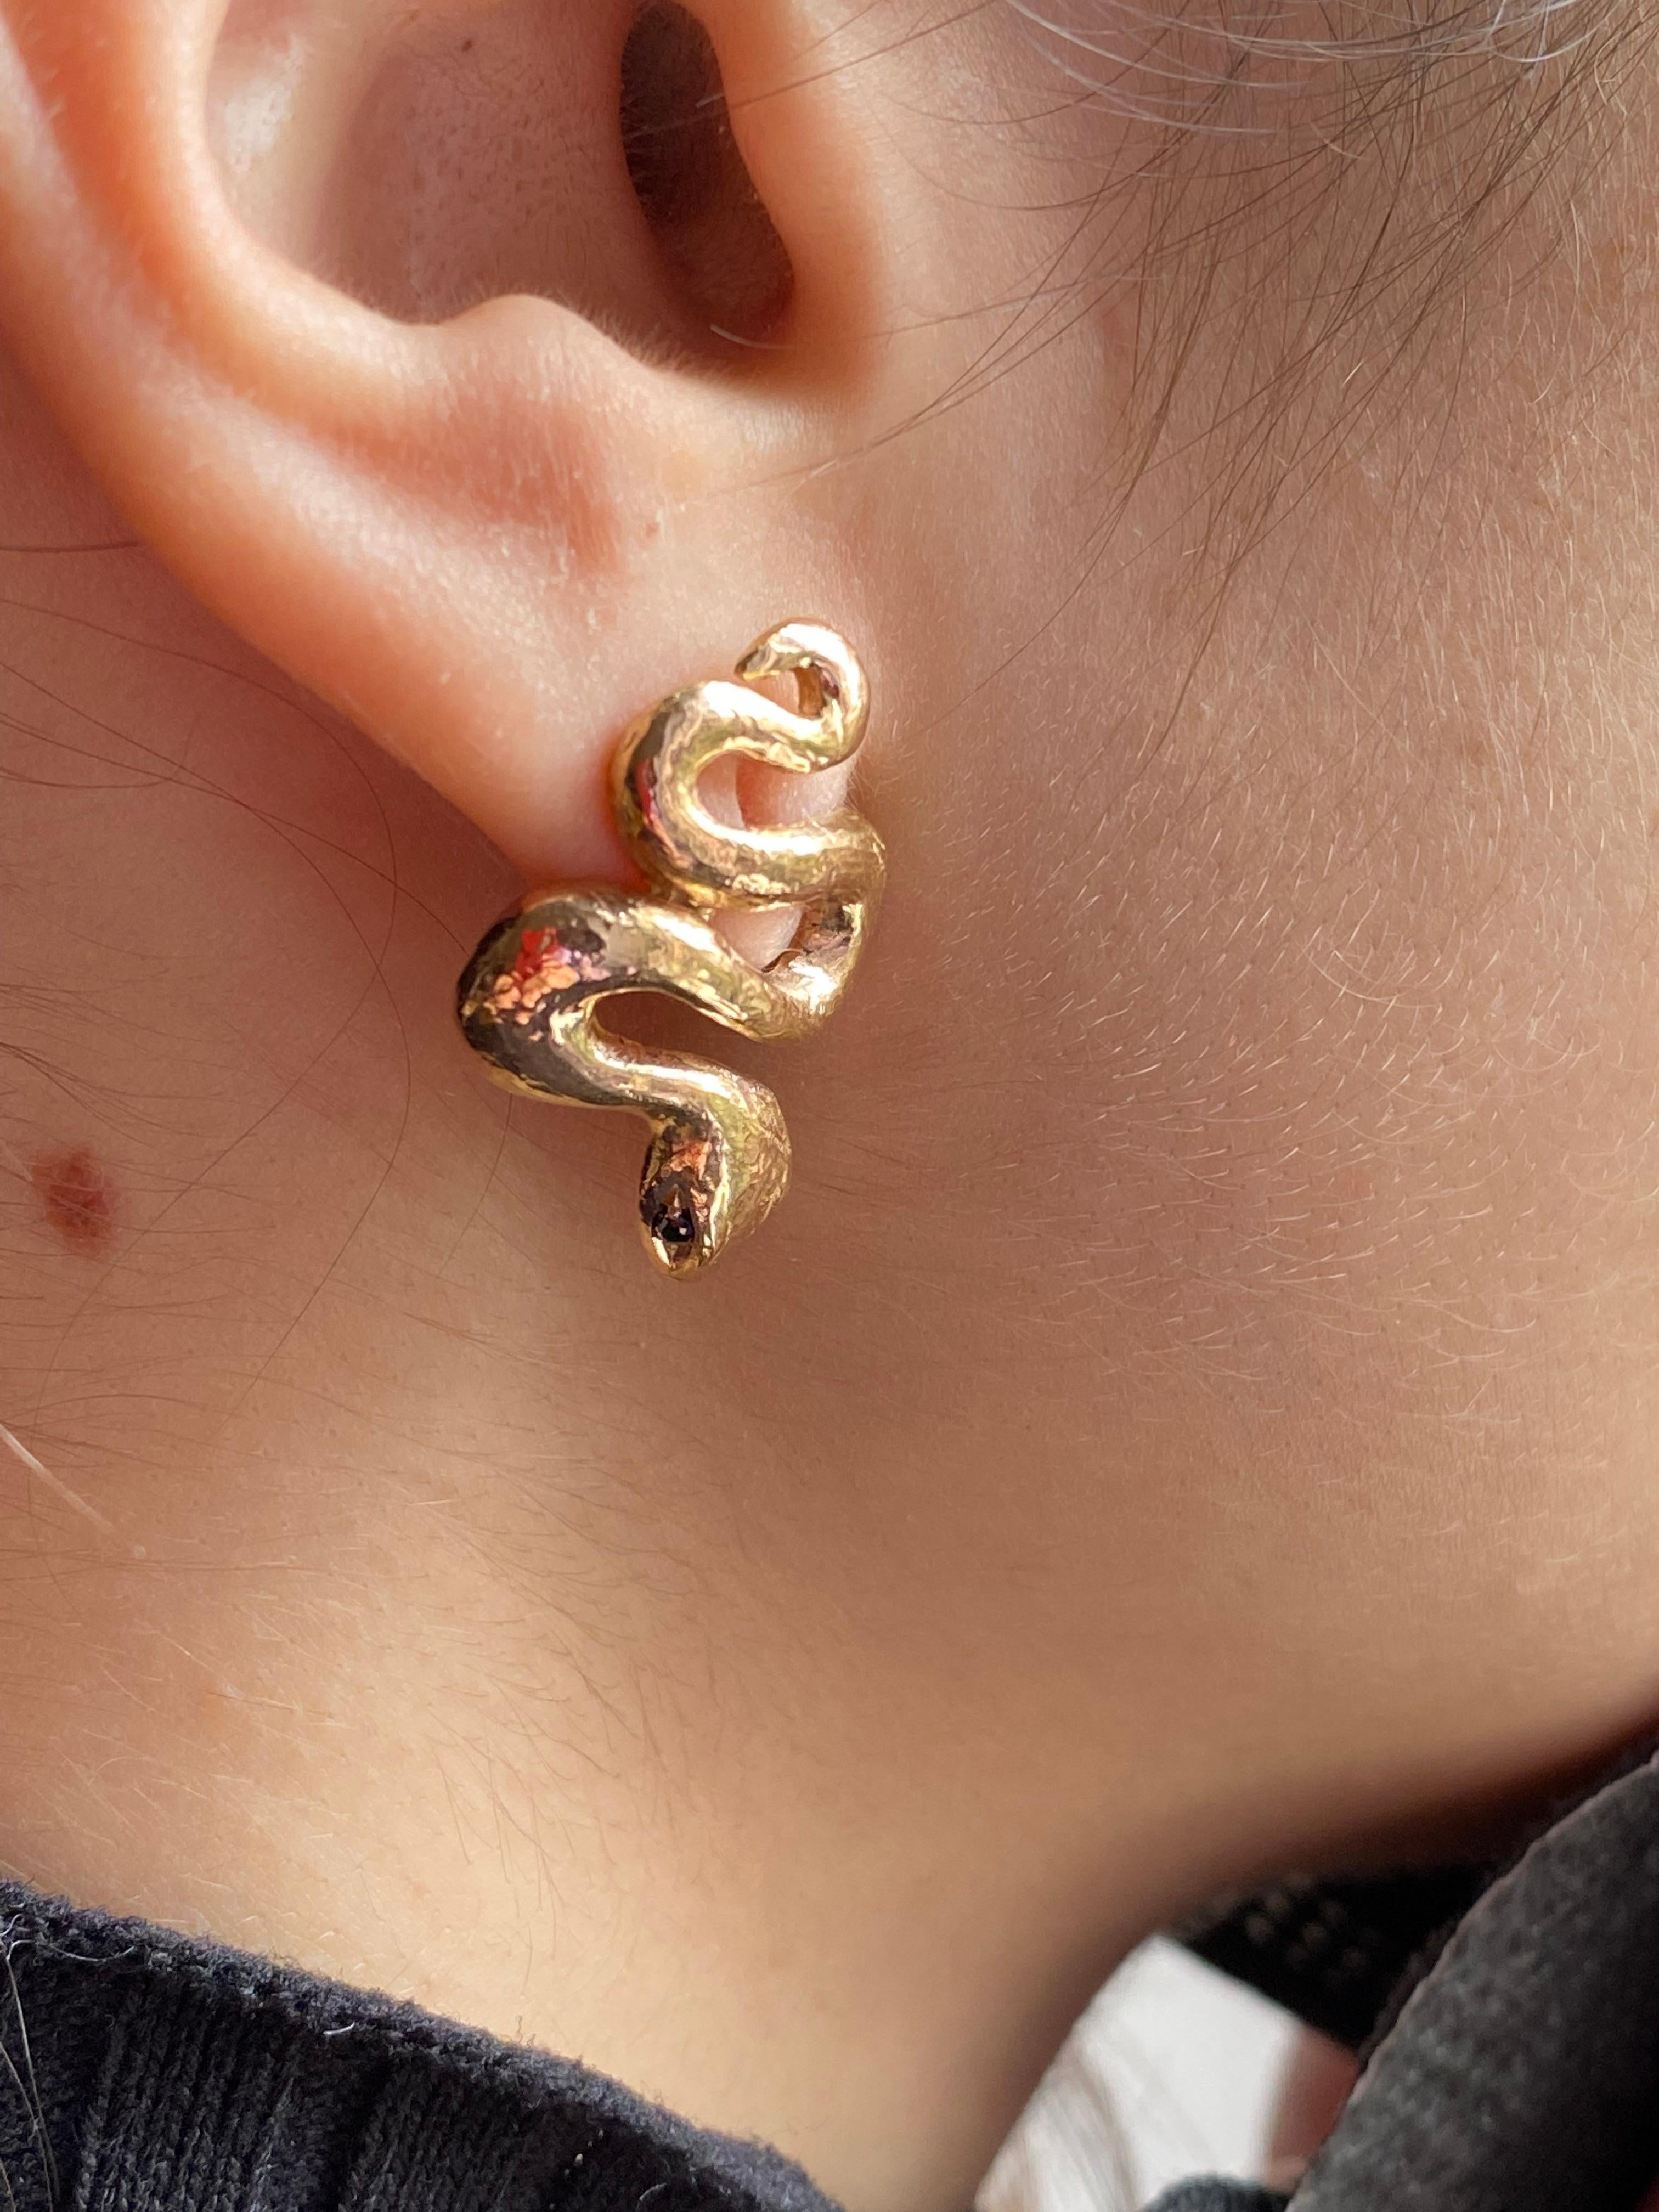 Handcrafted 18 Hammered Yellow Gold 0.004 Karat Black Diamonds Snake Stud Earrings 
A beautiful pair of stud earrings handcrafted in 18 karats yellow gold and embellished with 0.04 black diamonds. 
We're a workshop so every piece is handmade,